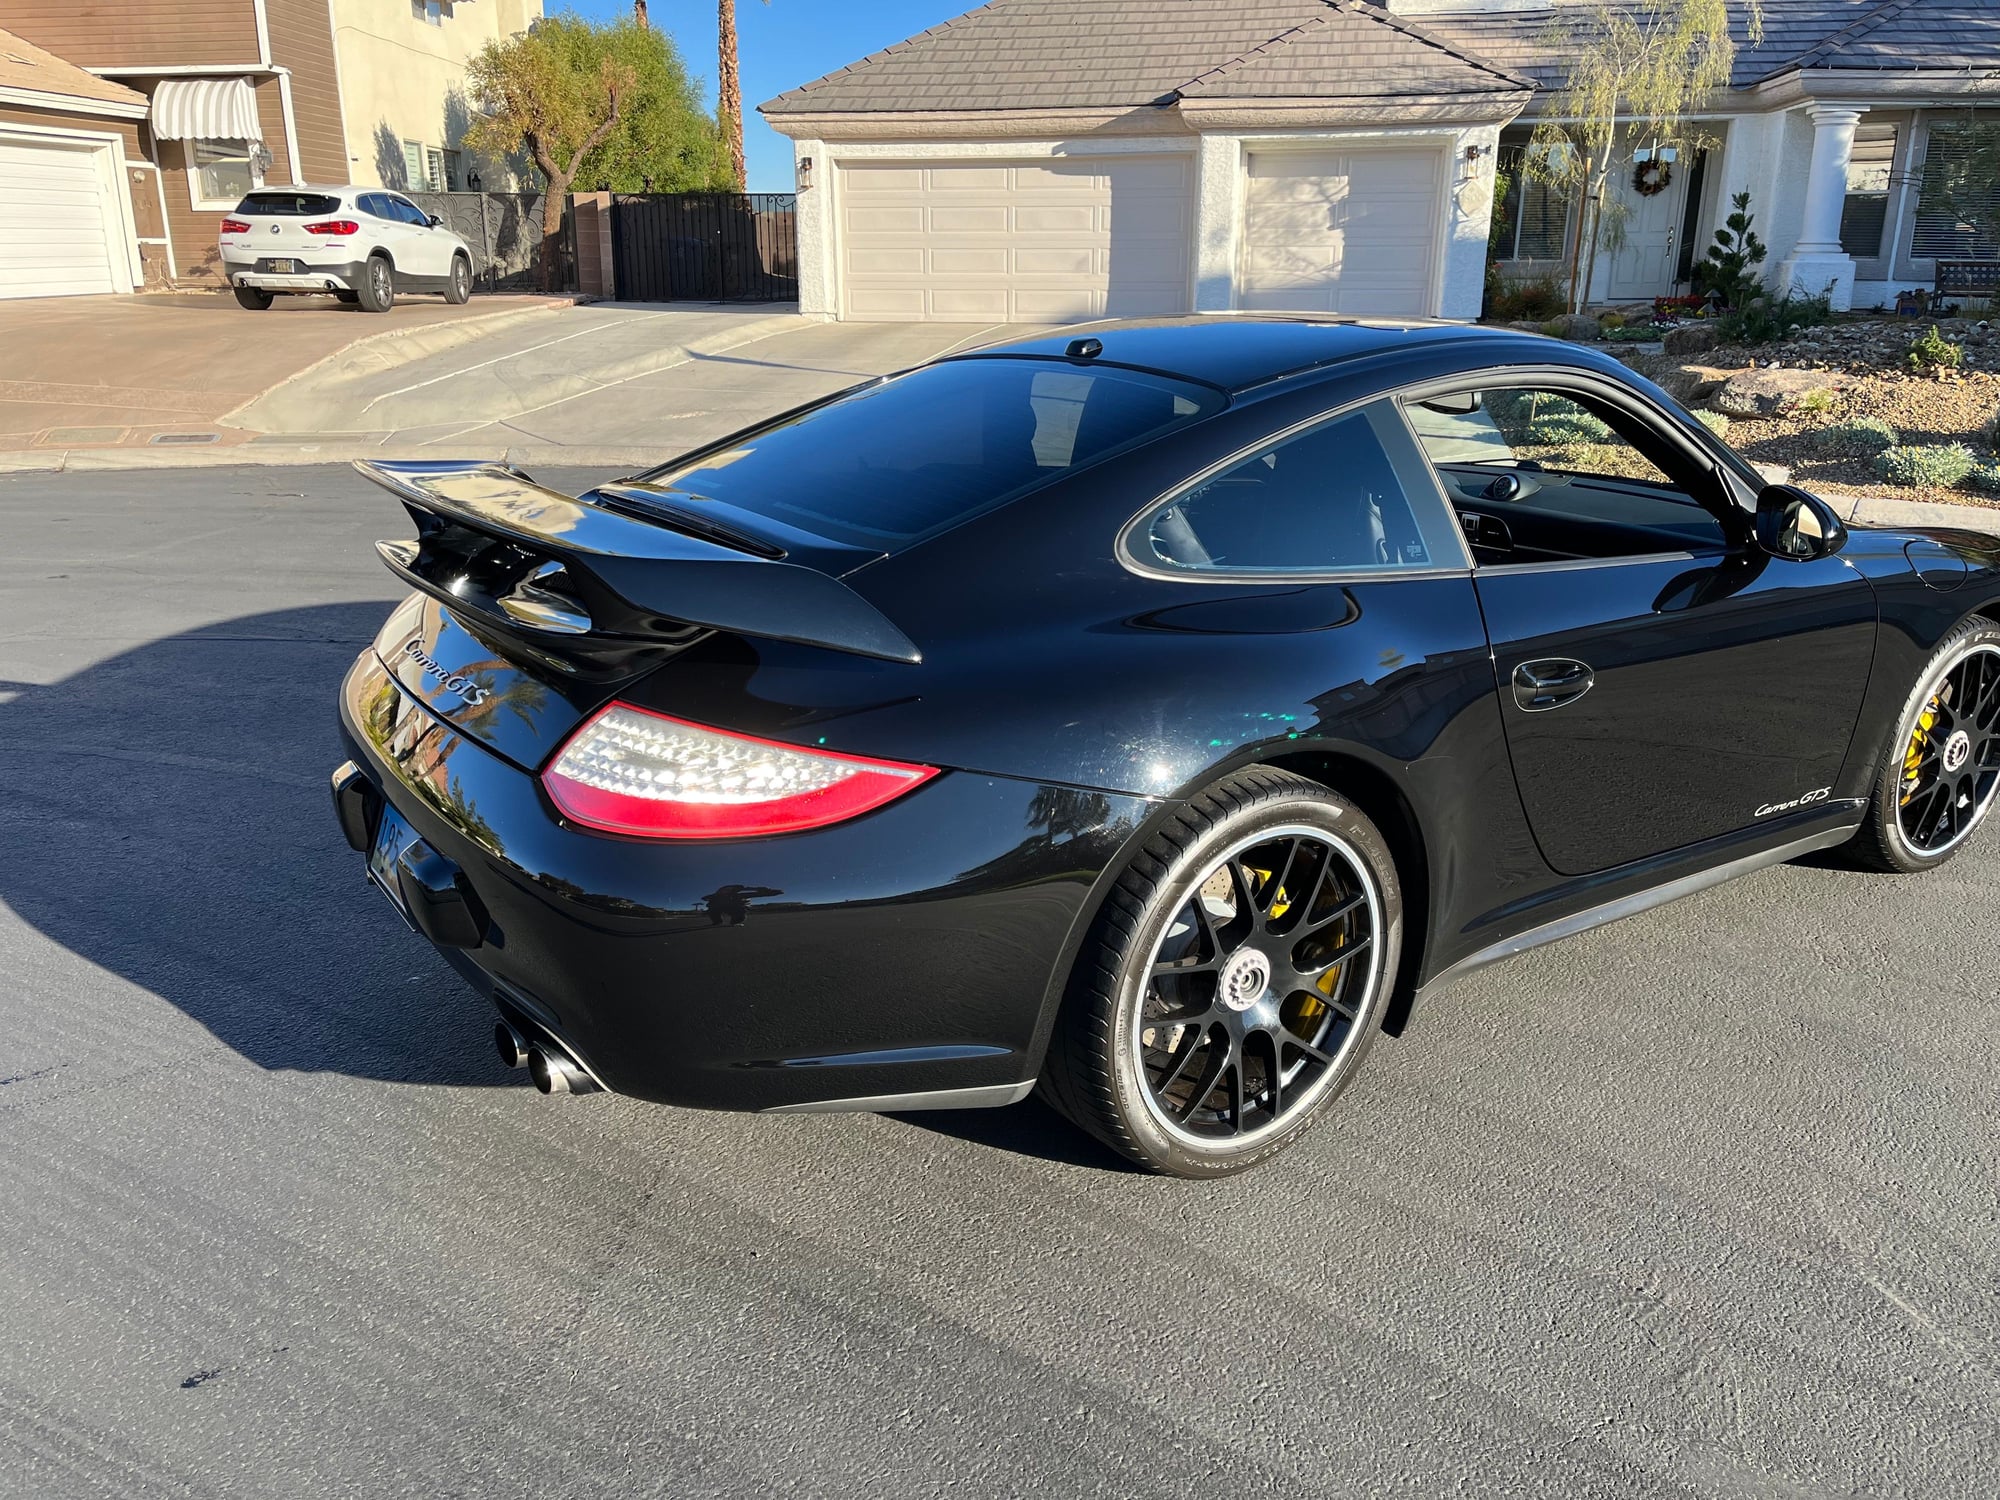 2012 Porsche 911 - 2012 997.2 Carrera GTS Manual Coupe - Used - VIN 123456789qwertypa - 52,000 Miles - 6 cyl - 2WD - Manual - Coupe - Black - Las Vegas, NV 89147, United States